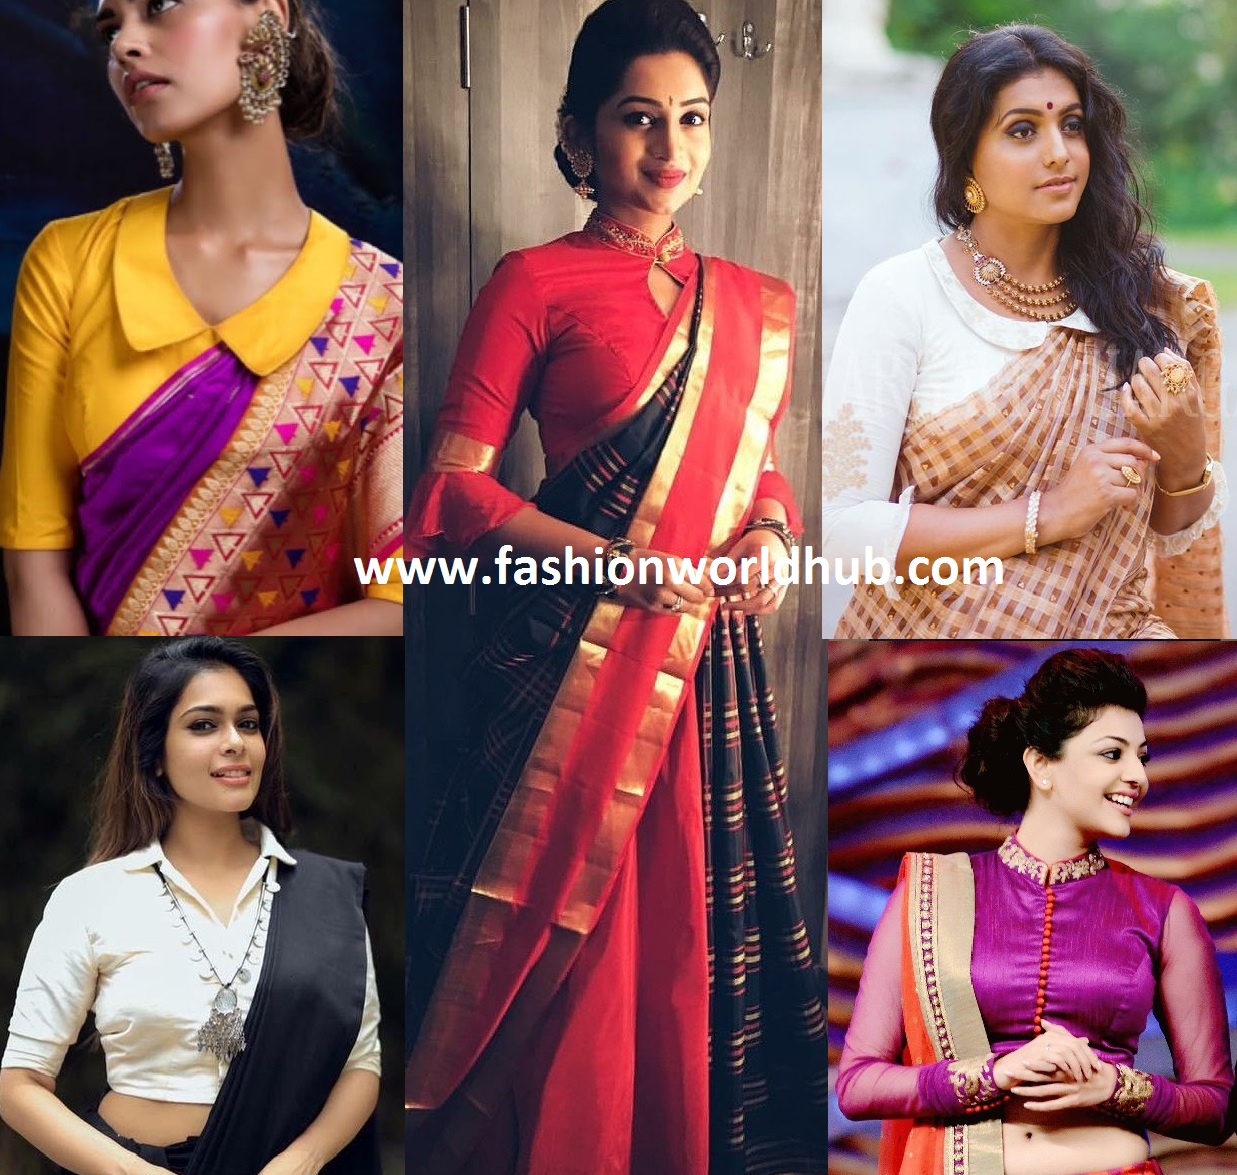 An Incredible Collection of 999+ Collar Neck Blouse Designs in Full 4K ...